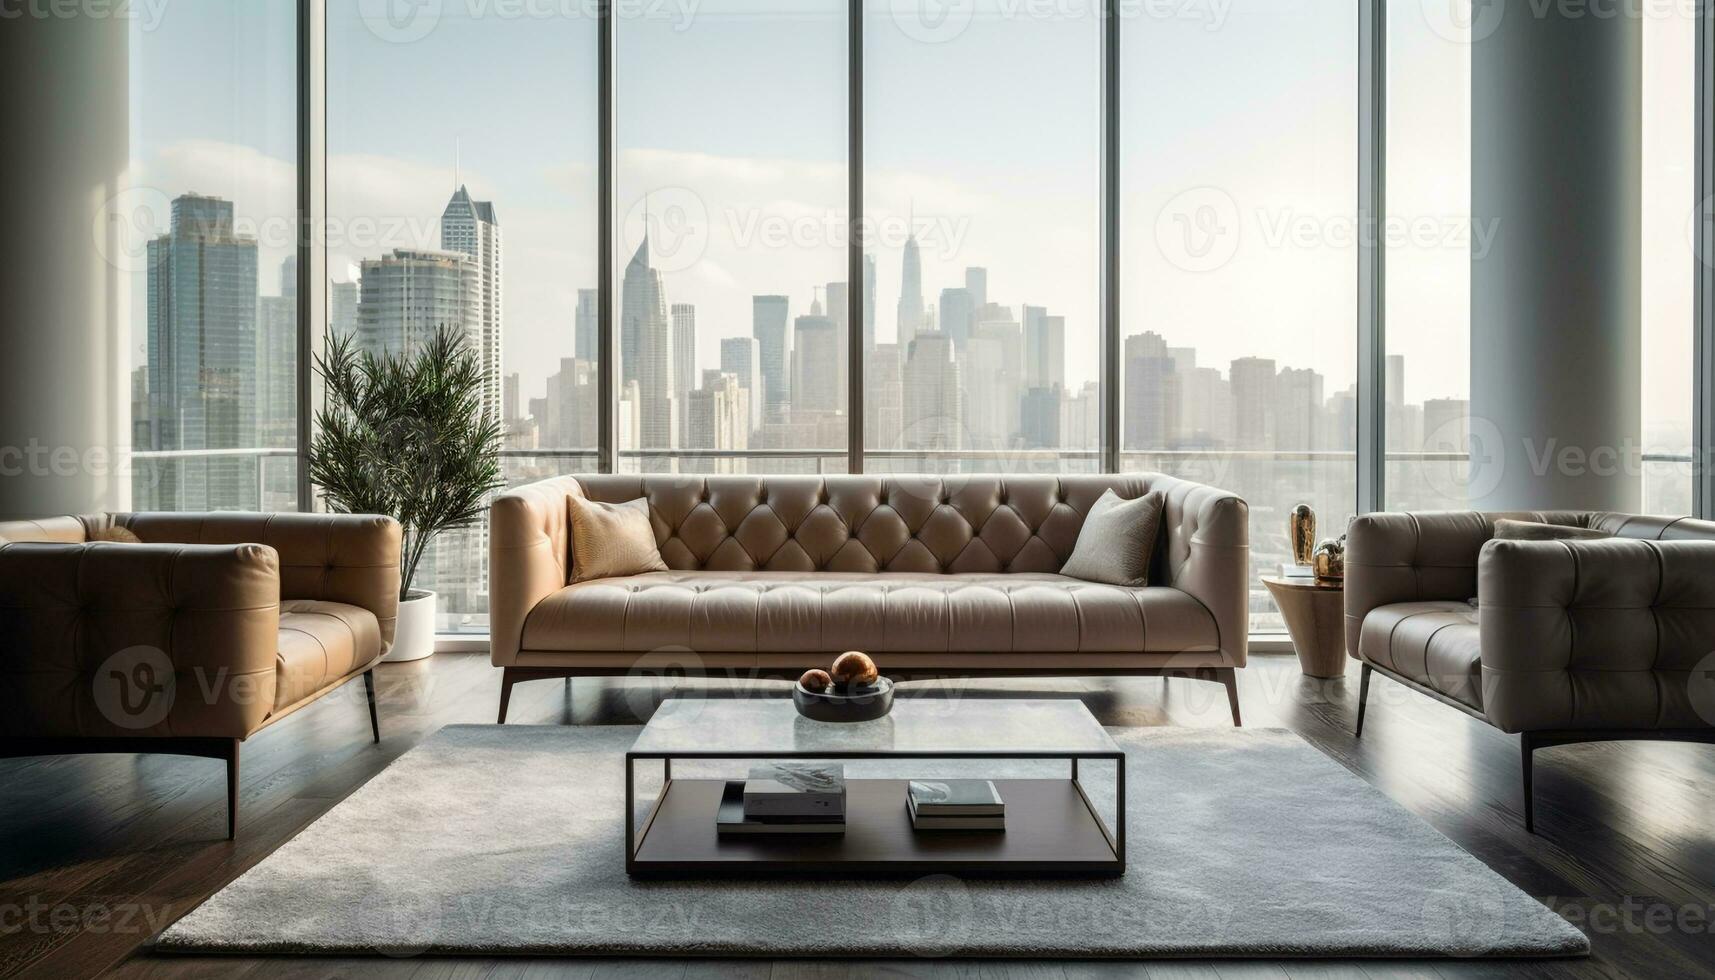 A modern, luxurious living room with comfortable armchairs and pillows generated by AI photo